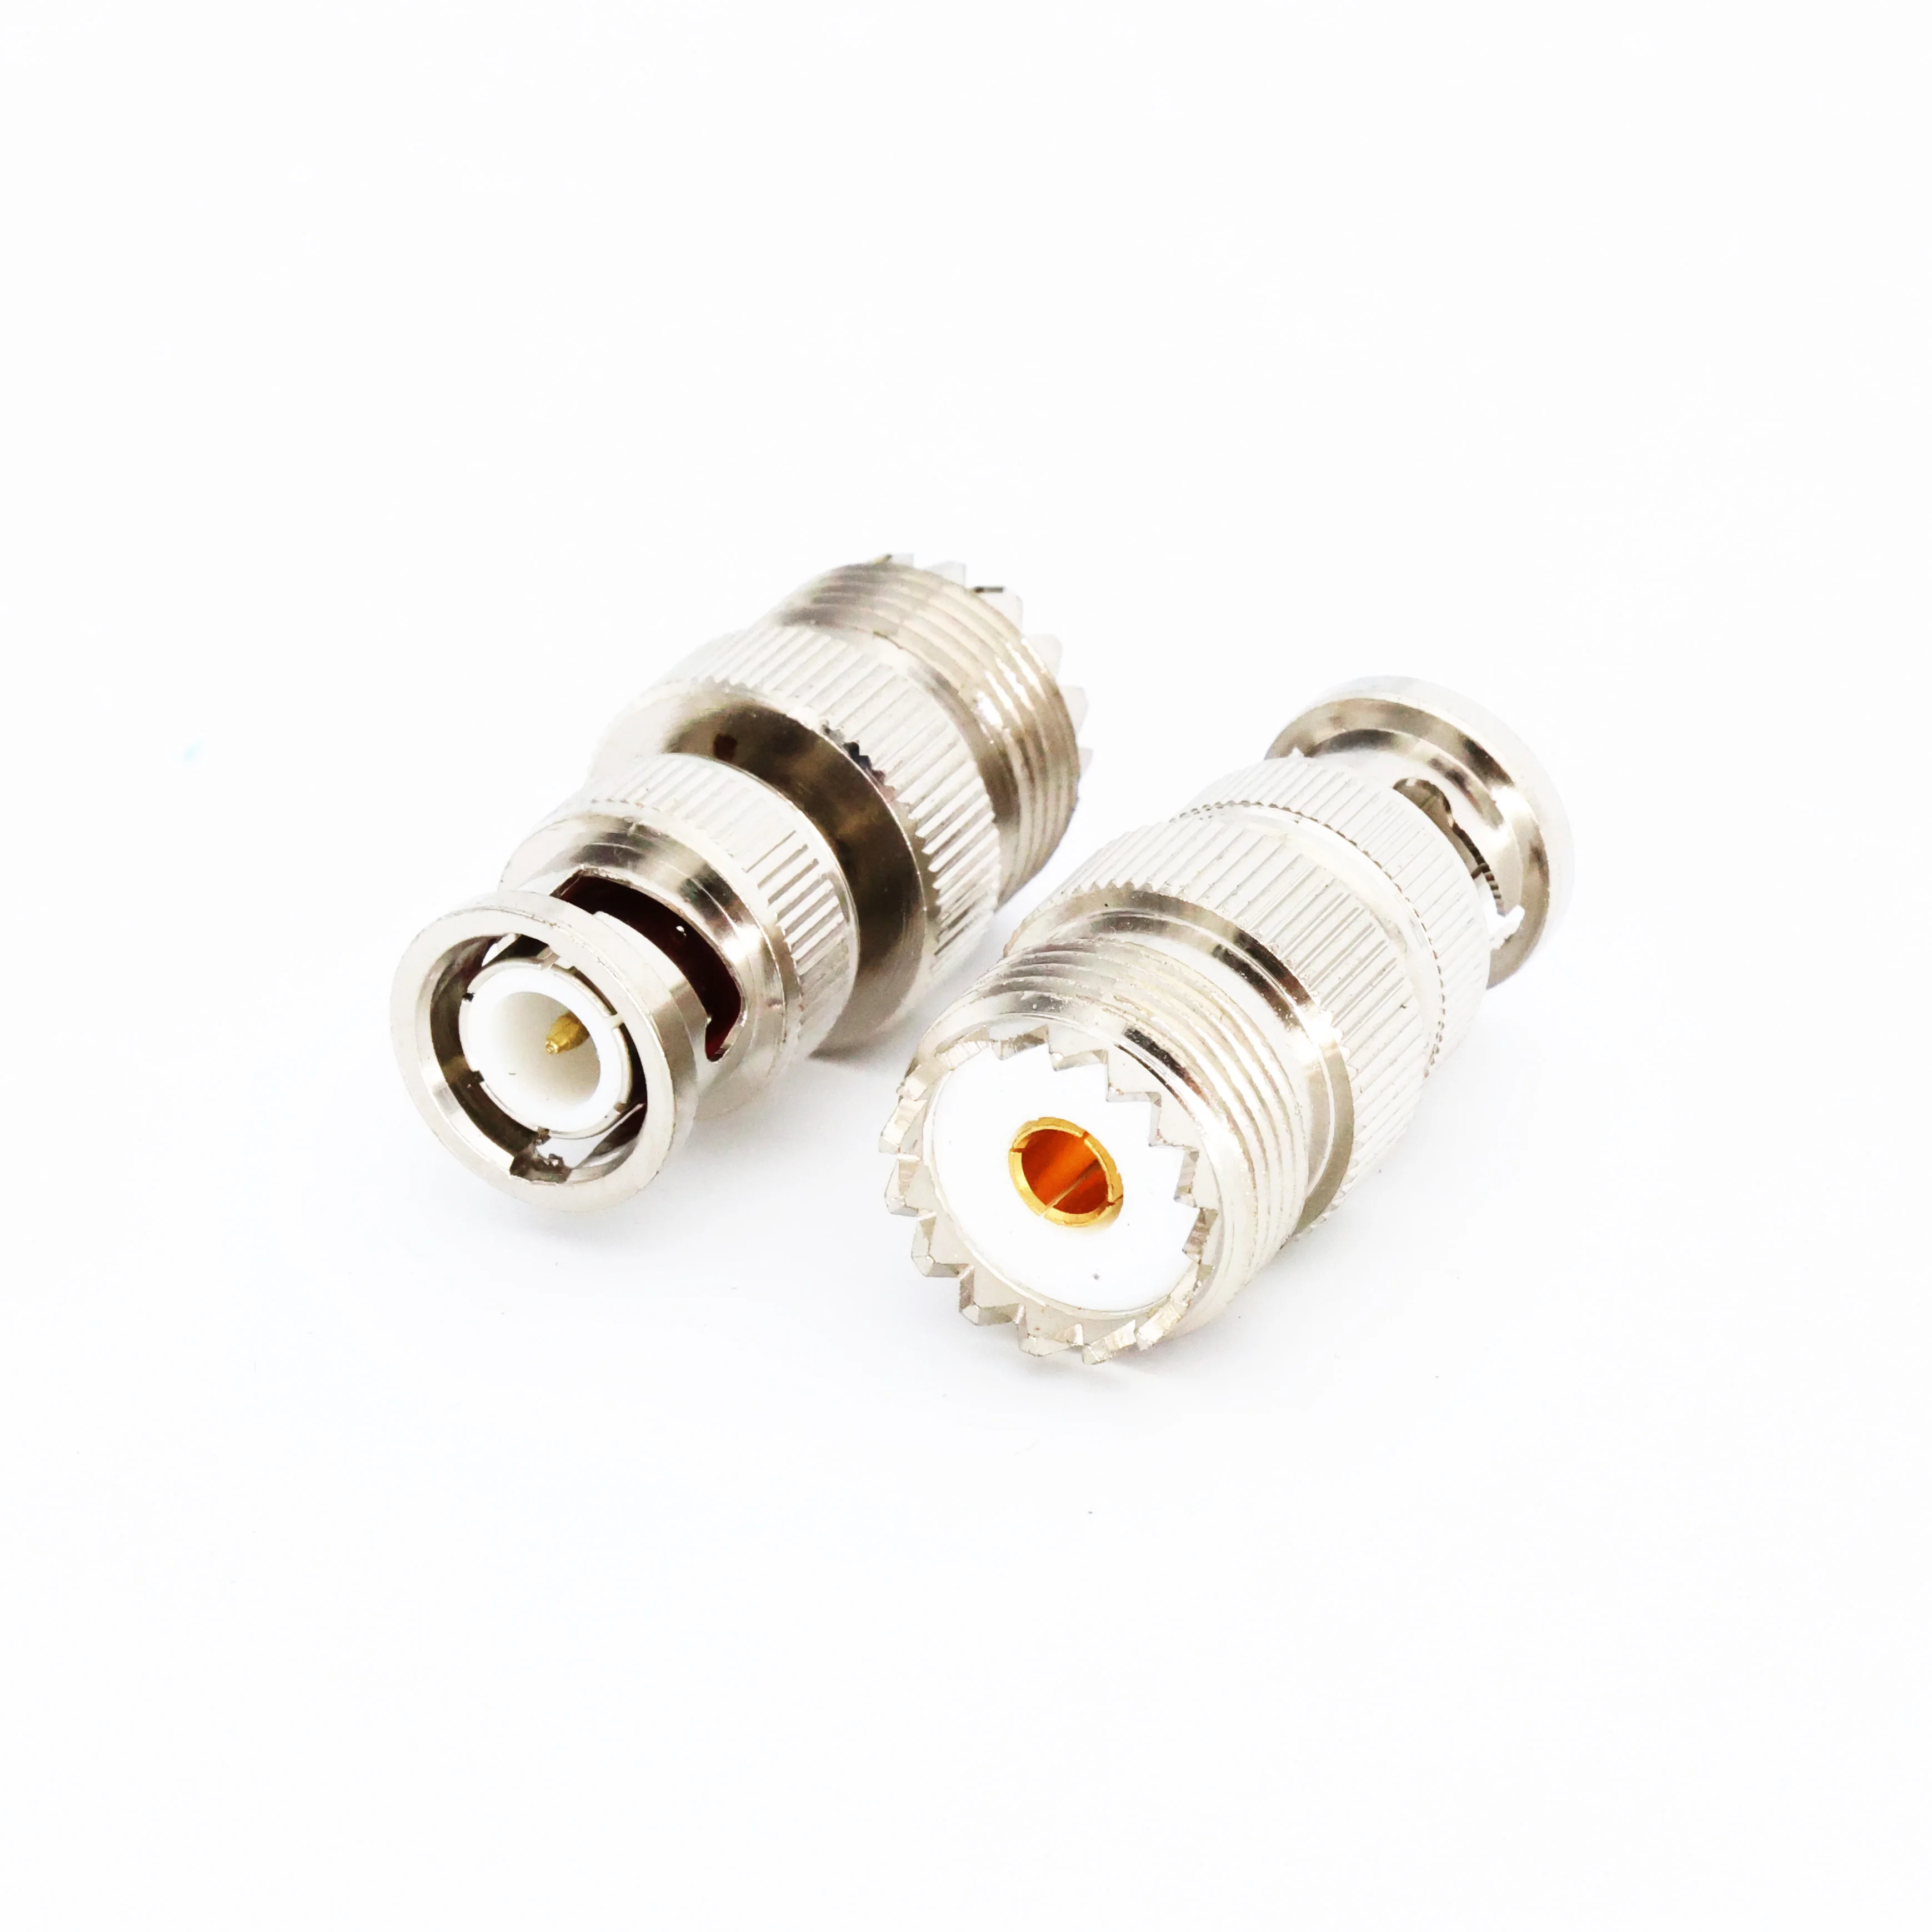 2pcs Cleqee BNC Male to UHF SO239 PL-259 Female RF Coaxial Adapter BNC to UHF Coax Jack Connector 2pcs sma female to uhf female adapter walkie talkie replacement for baofeng uv 5r series radio coaxial rf connector